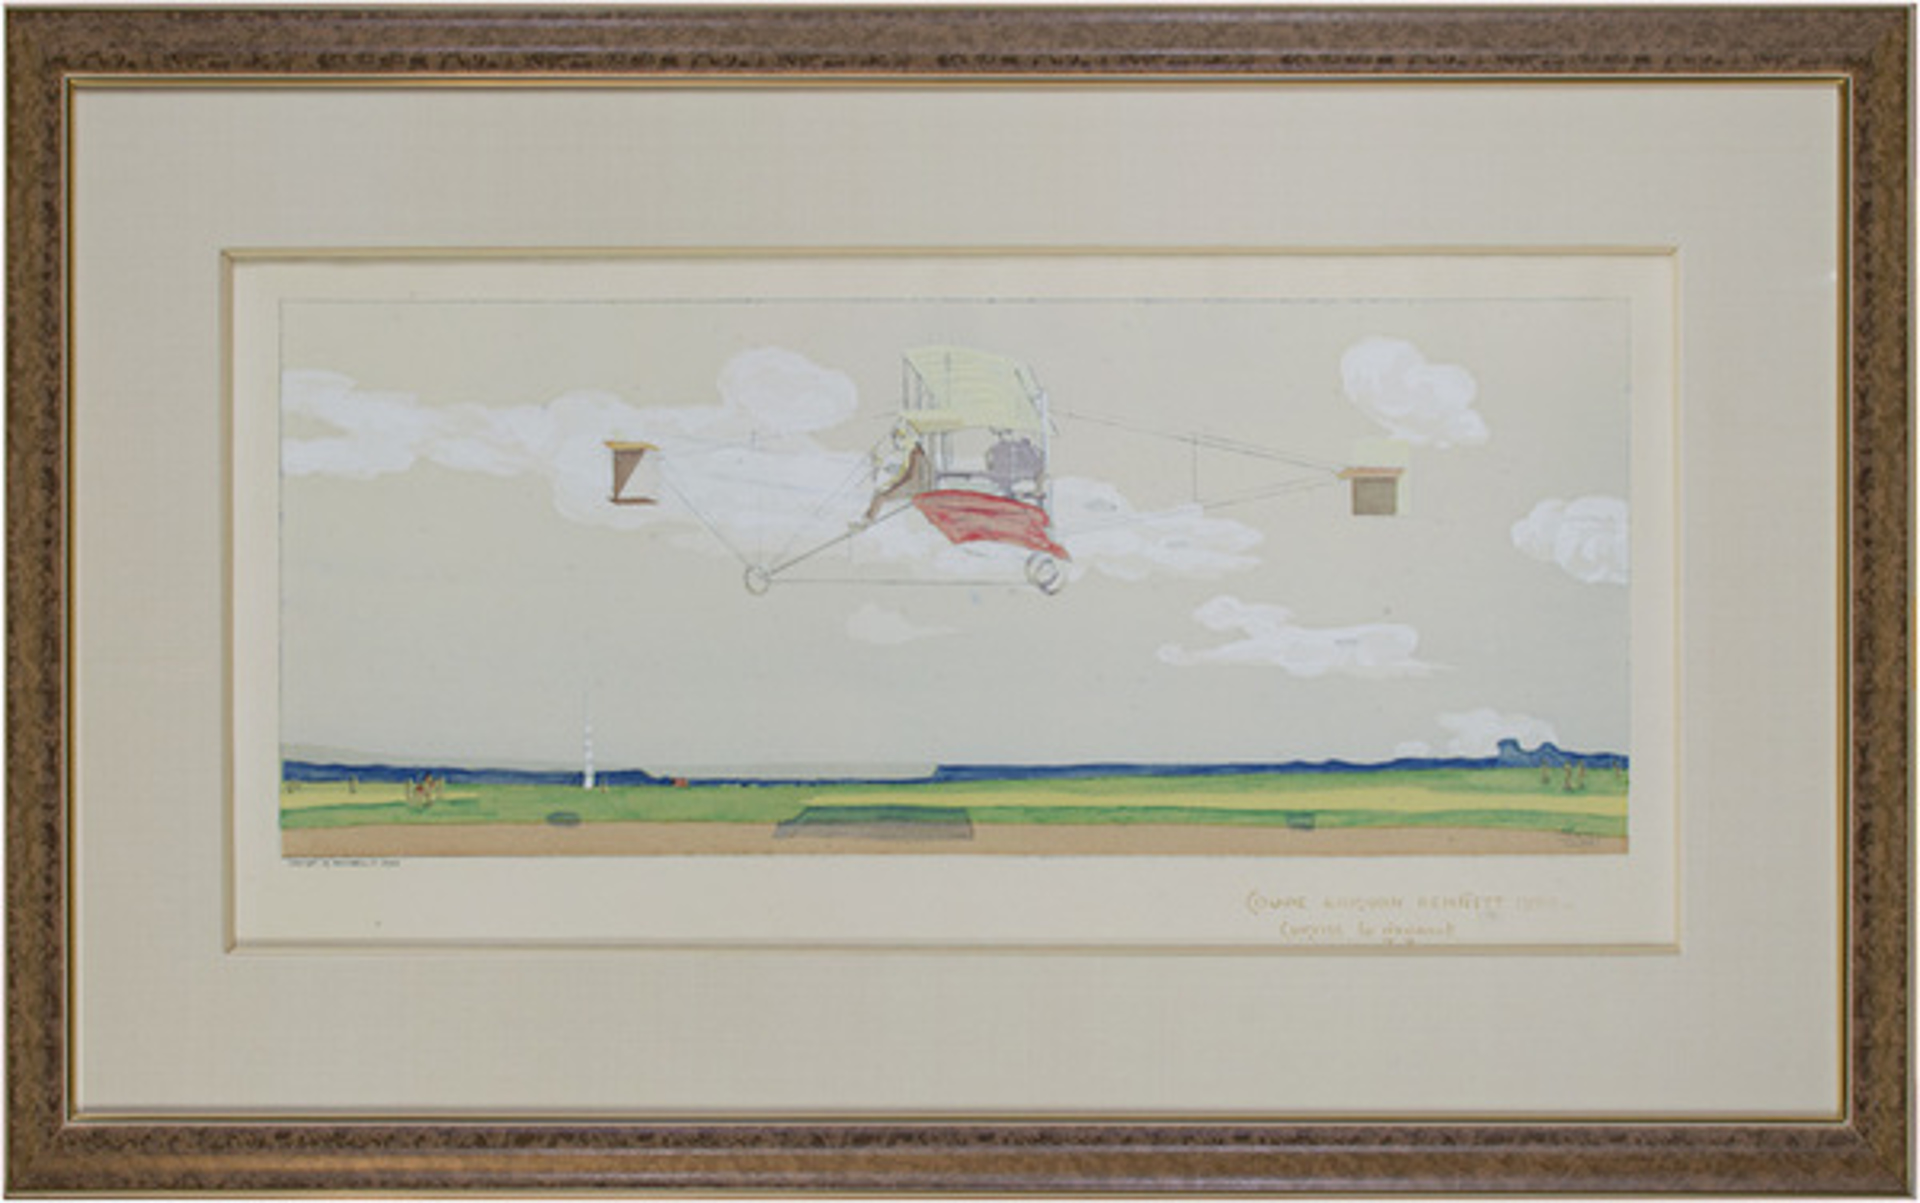 Coupe Gordon Bennett 1909 — Curtiss le Gagnant by Marguerite Montaut (GAMY)